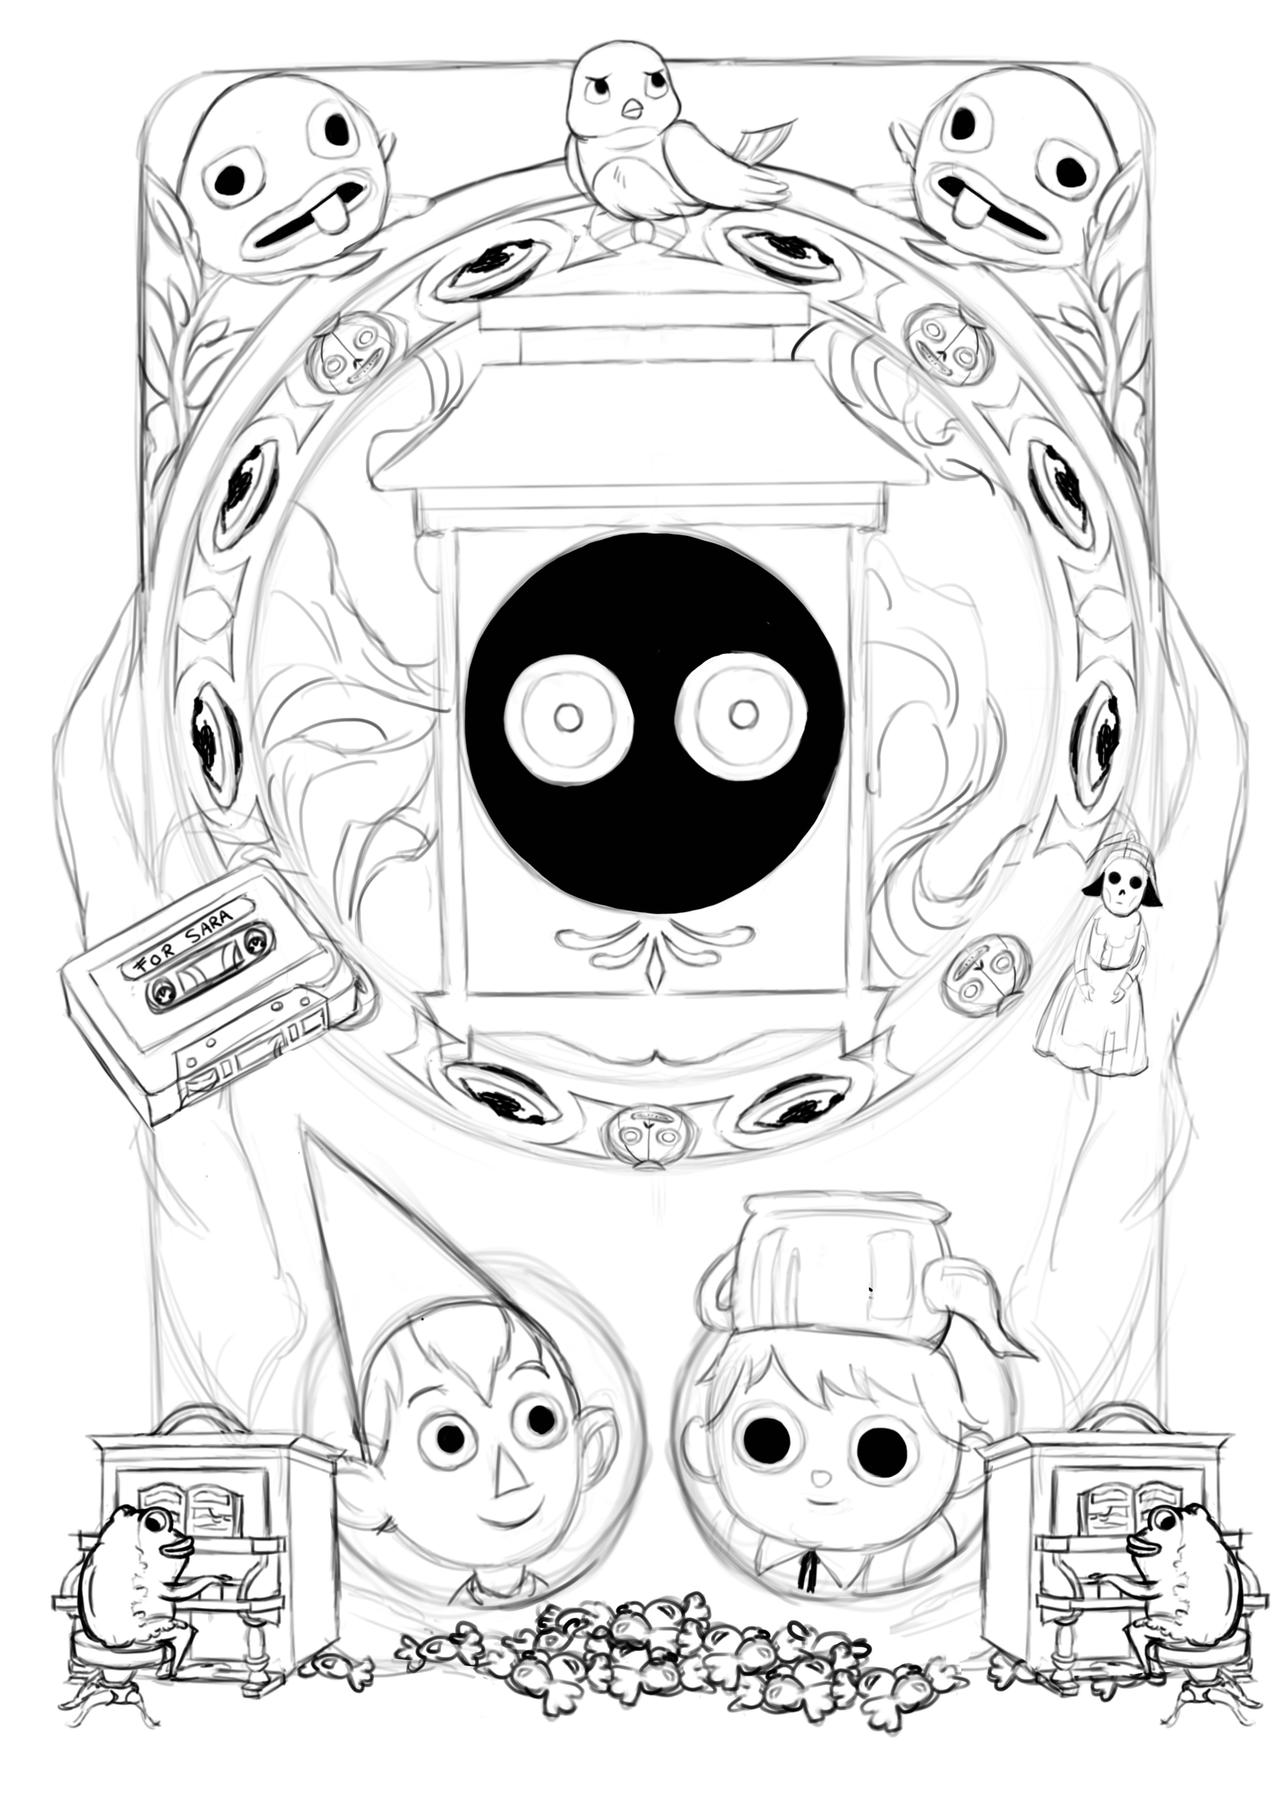 Over The Garden Wall - Print Sketch by ci-designs on DeviantArt